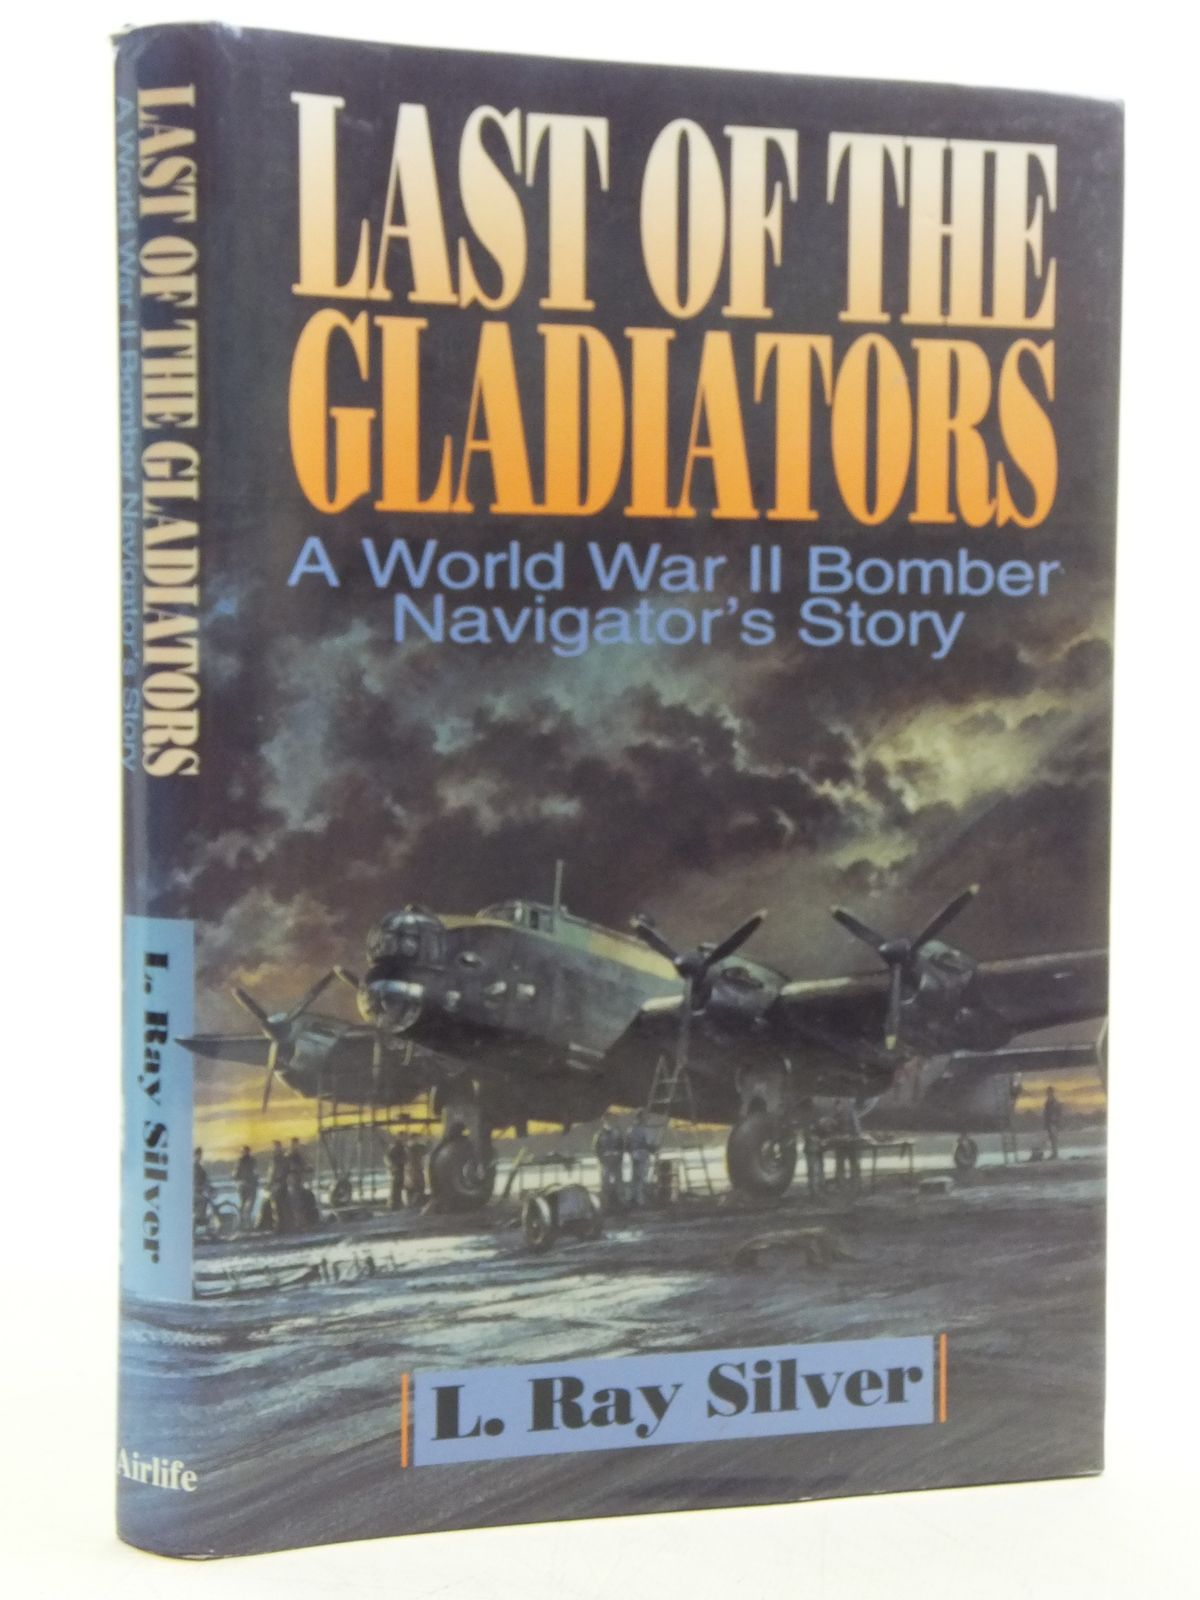 Photo of LAST OF THE GLADIATORS A WORLD WAR II BOMBER NAVIGATOR'S STORY written by Silver, L. Ray published by Airlife (STOCK CODE: 2120365)  for sale by Stella & Rose's Books